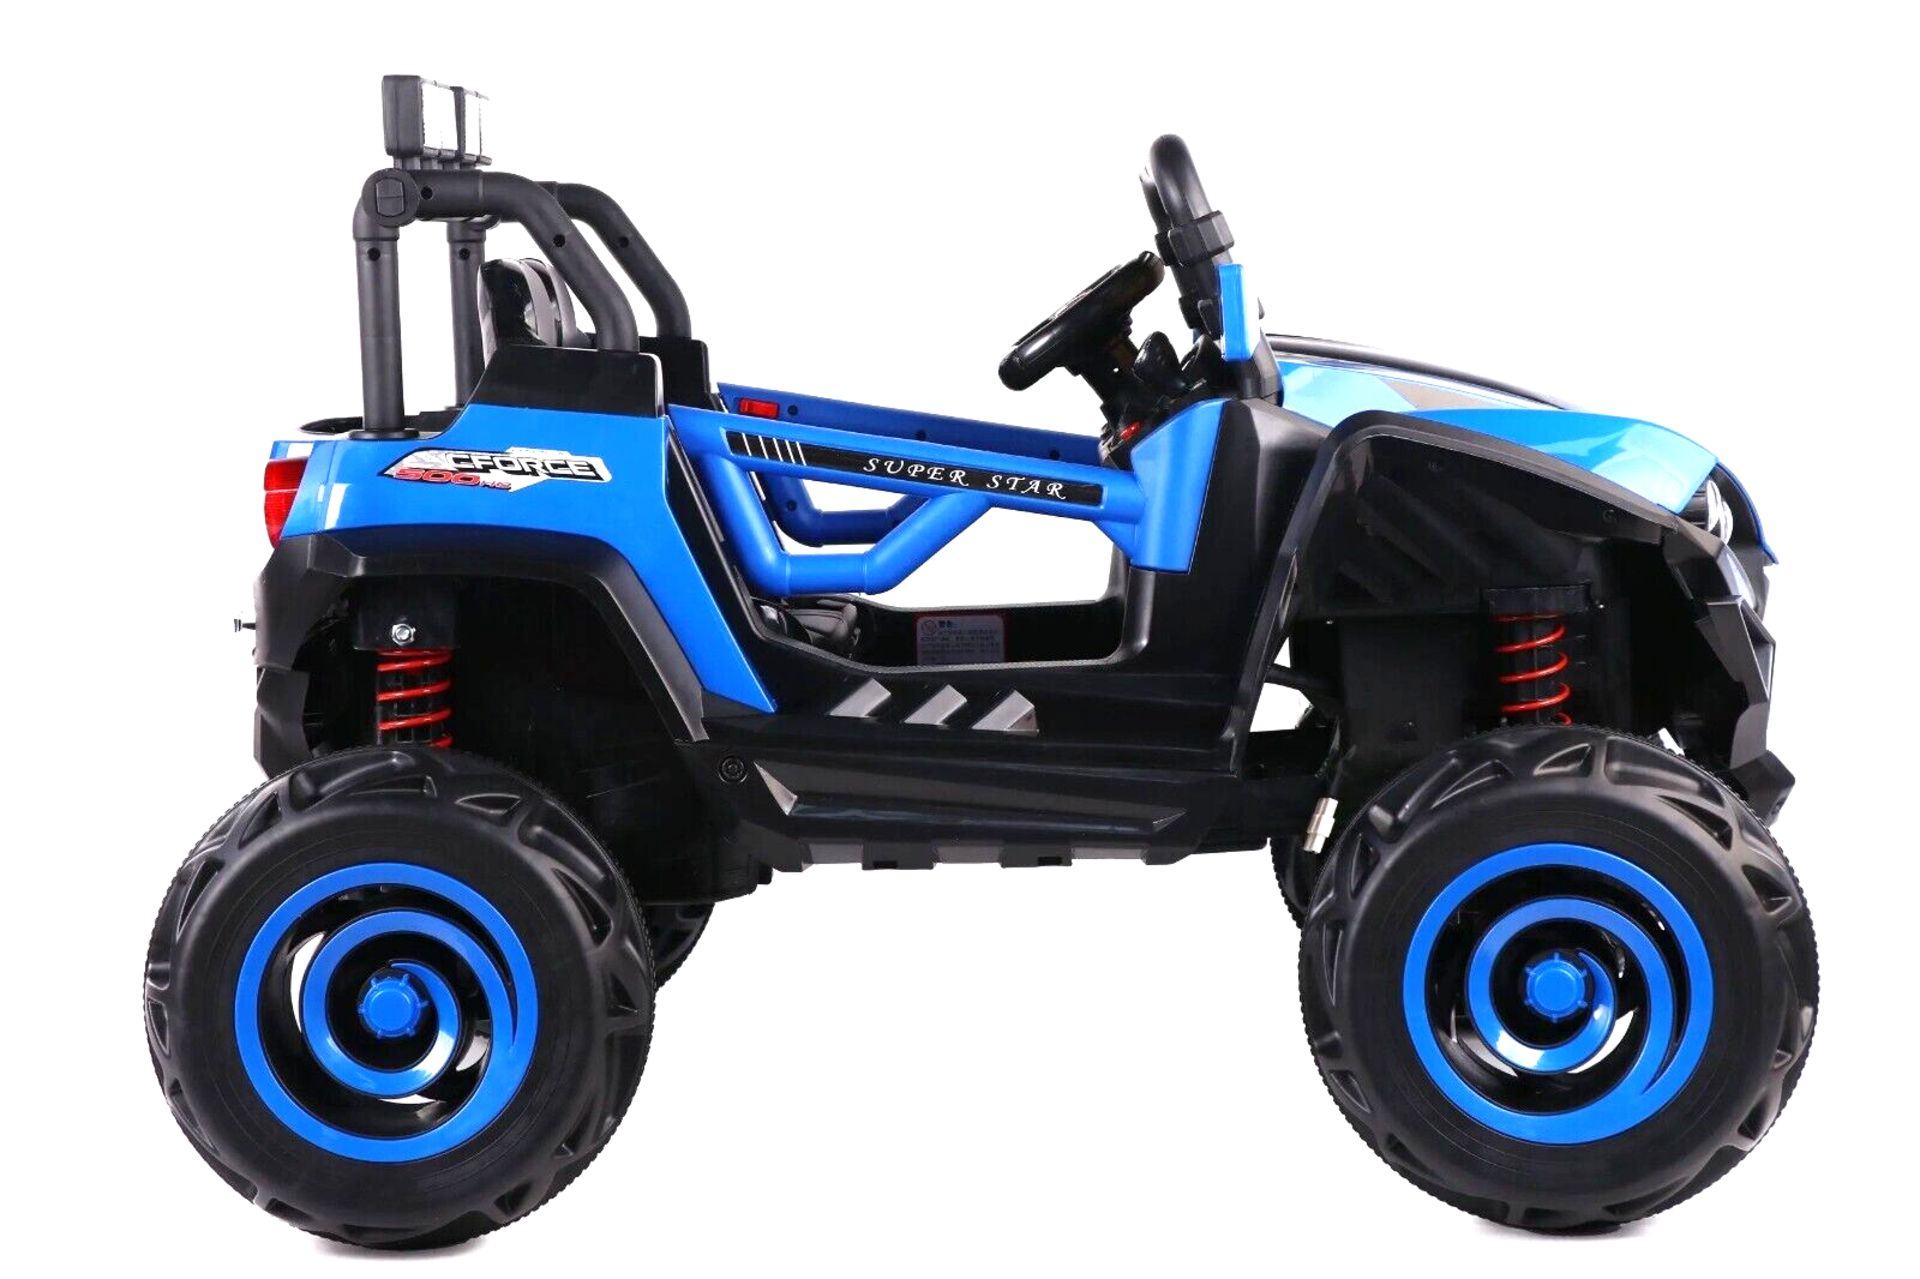 JOB LOT 5 X BLUE 4X4 ATV/UTV KIDS BUGGY JEEP ELECTRIC CAR WITH REMOTE BRAND NEW BOXED - Image 3 of 5